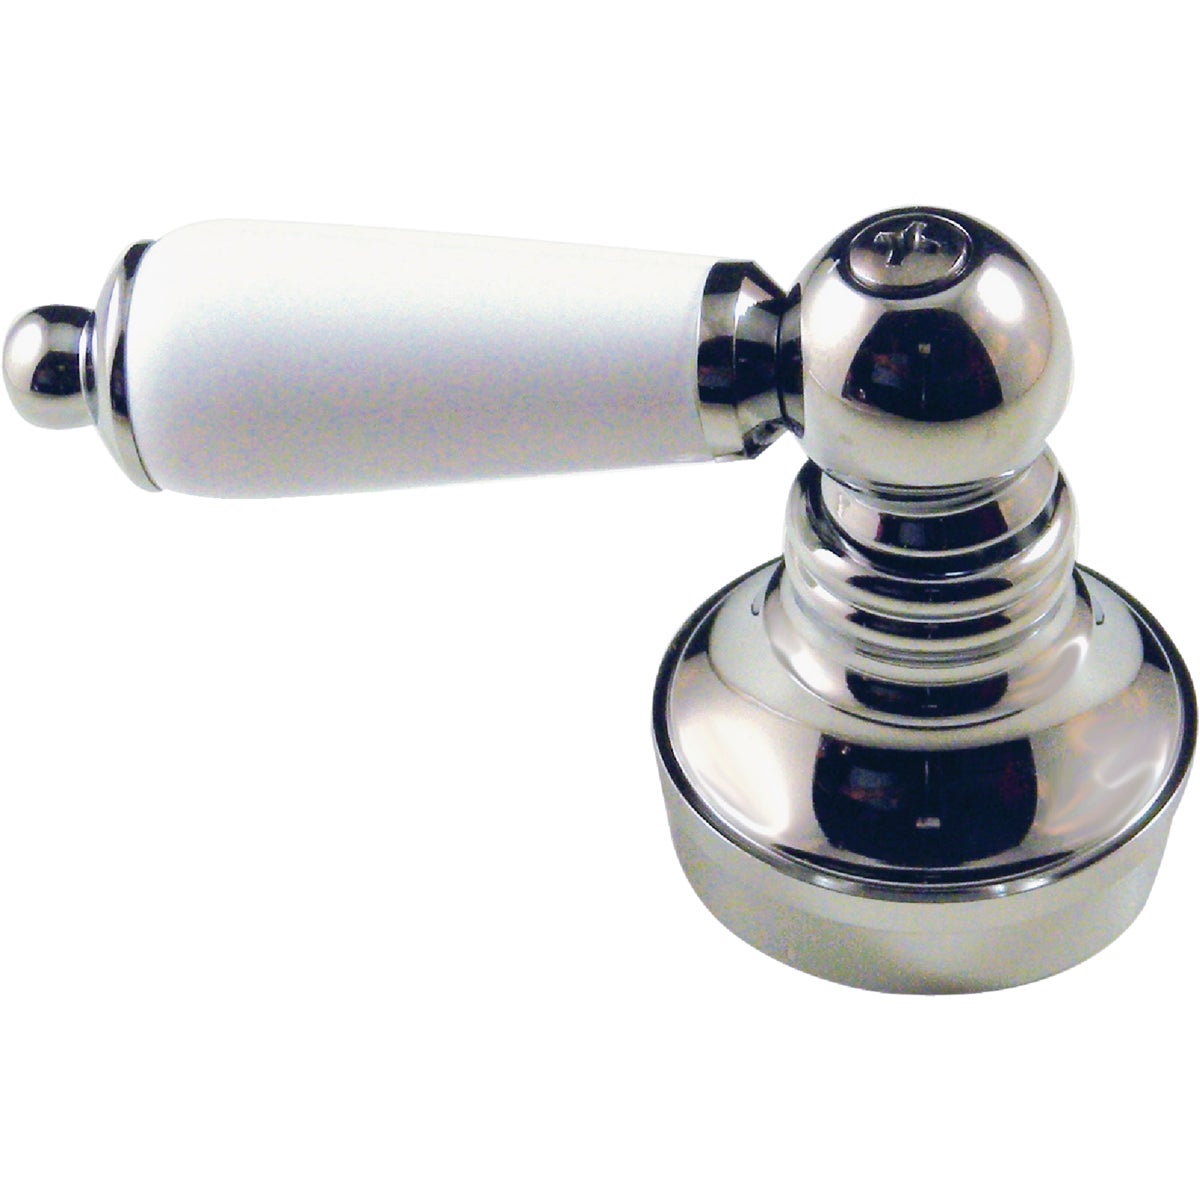 Item 413715, Includes hot, cold, and arrow buttons for 2-handle faucets.